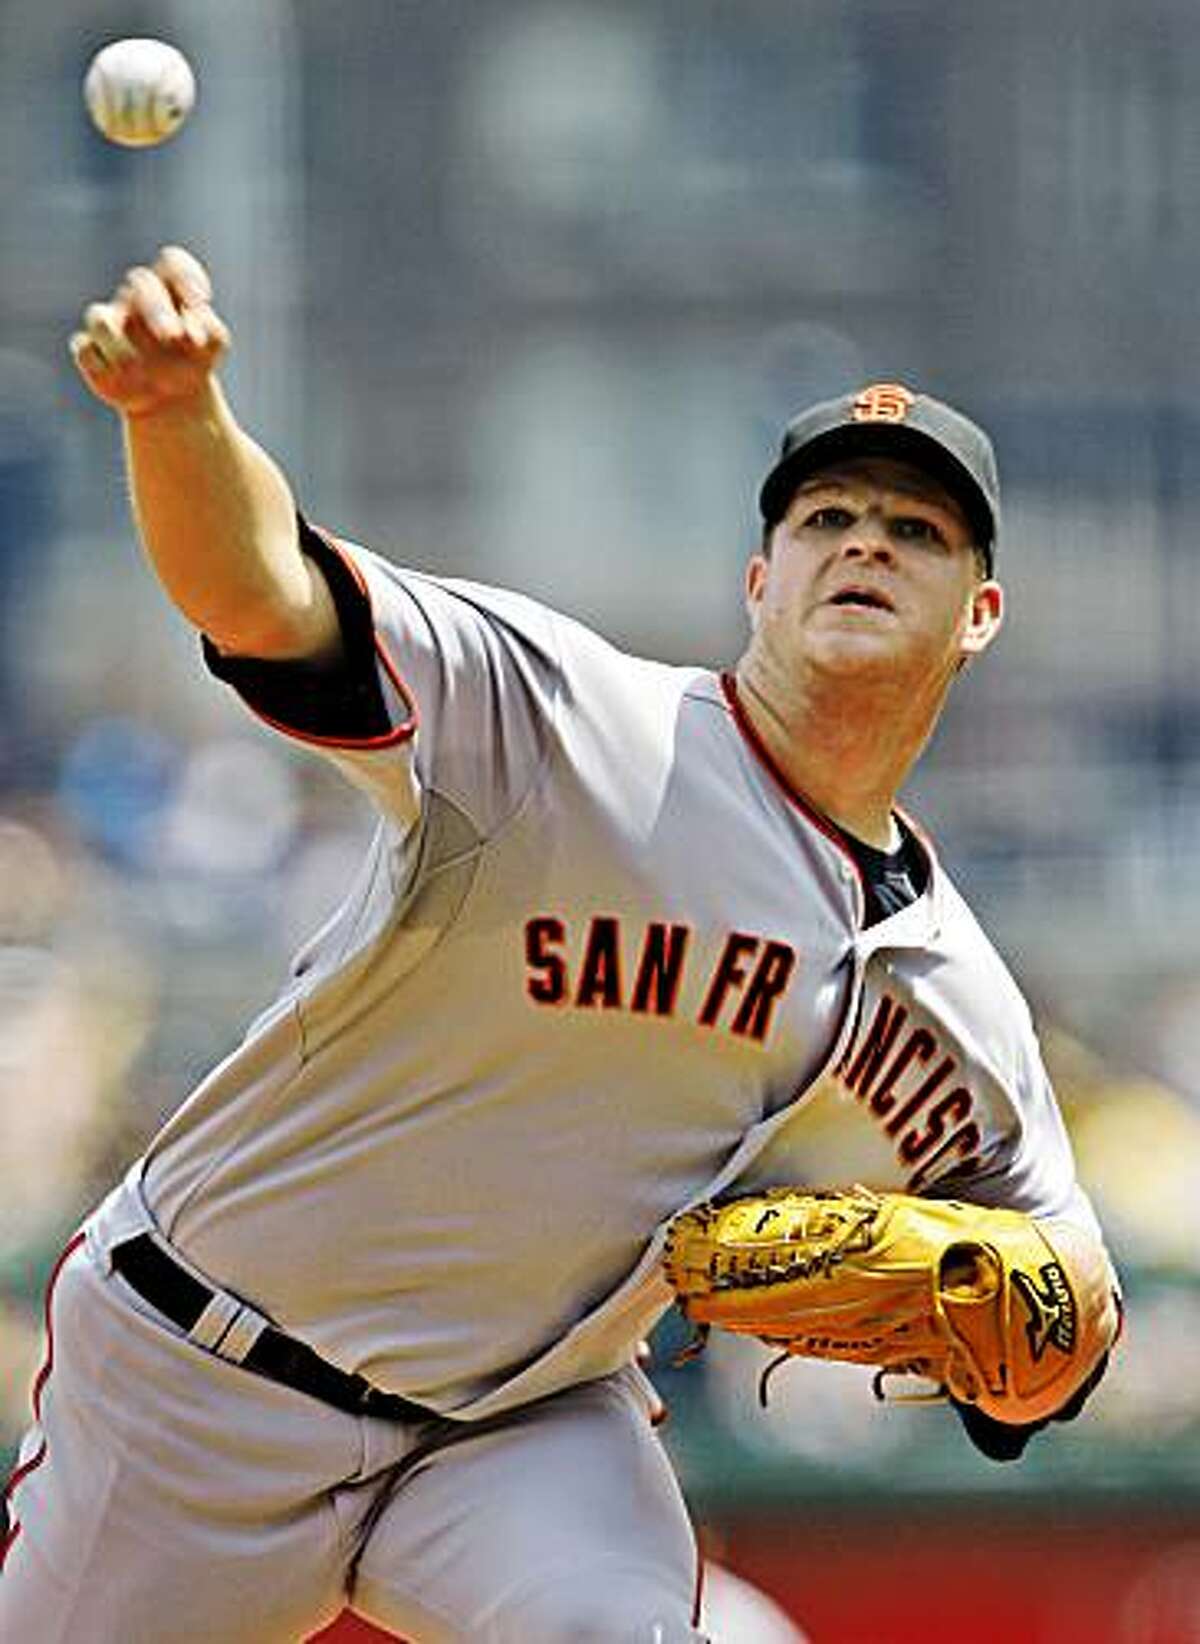 San Francisco Giants pitcher Matt Cain throws in the third inning against the Pittsburgh Pirates during a baseball game in Pittsburgh on Sunday, July 19, 2009. Cain got his 11th win of the season in the Giants' 4-3 win.